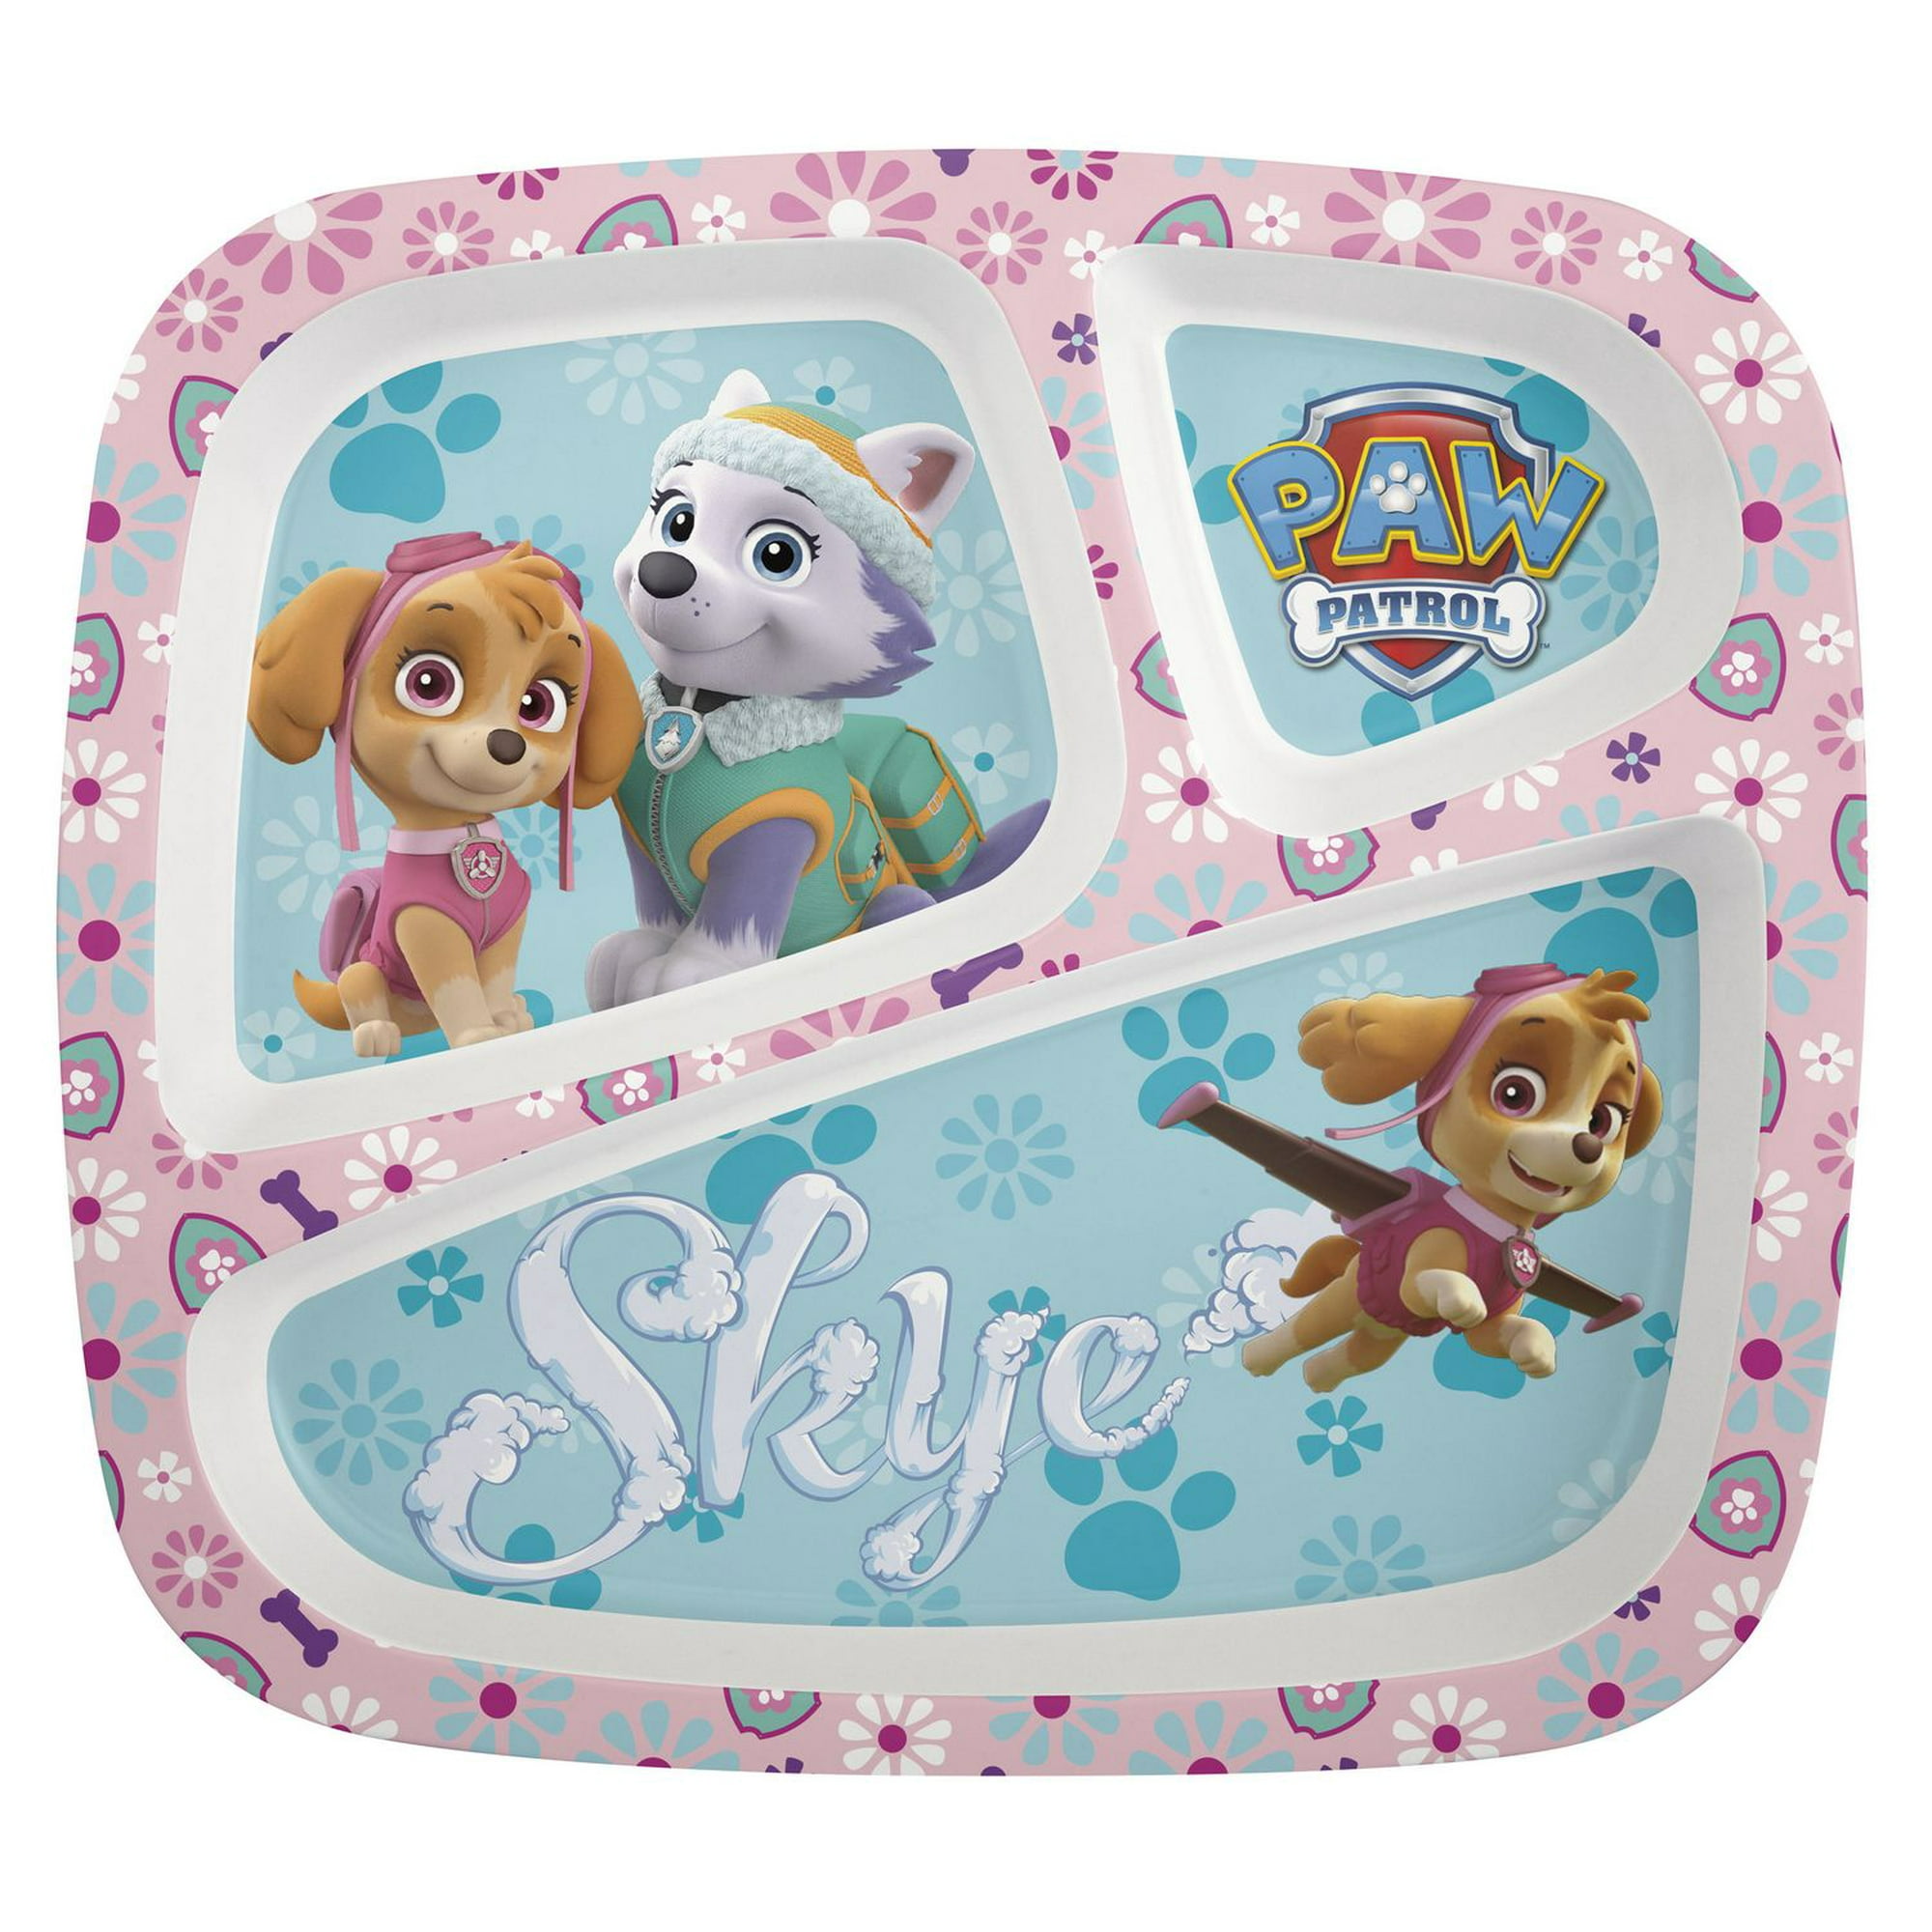 PartyMart. PAW PATROL GIRL - 9 SQUARE PLATE